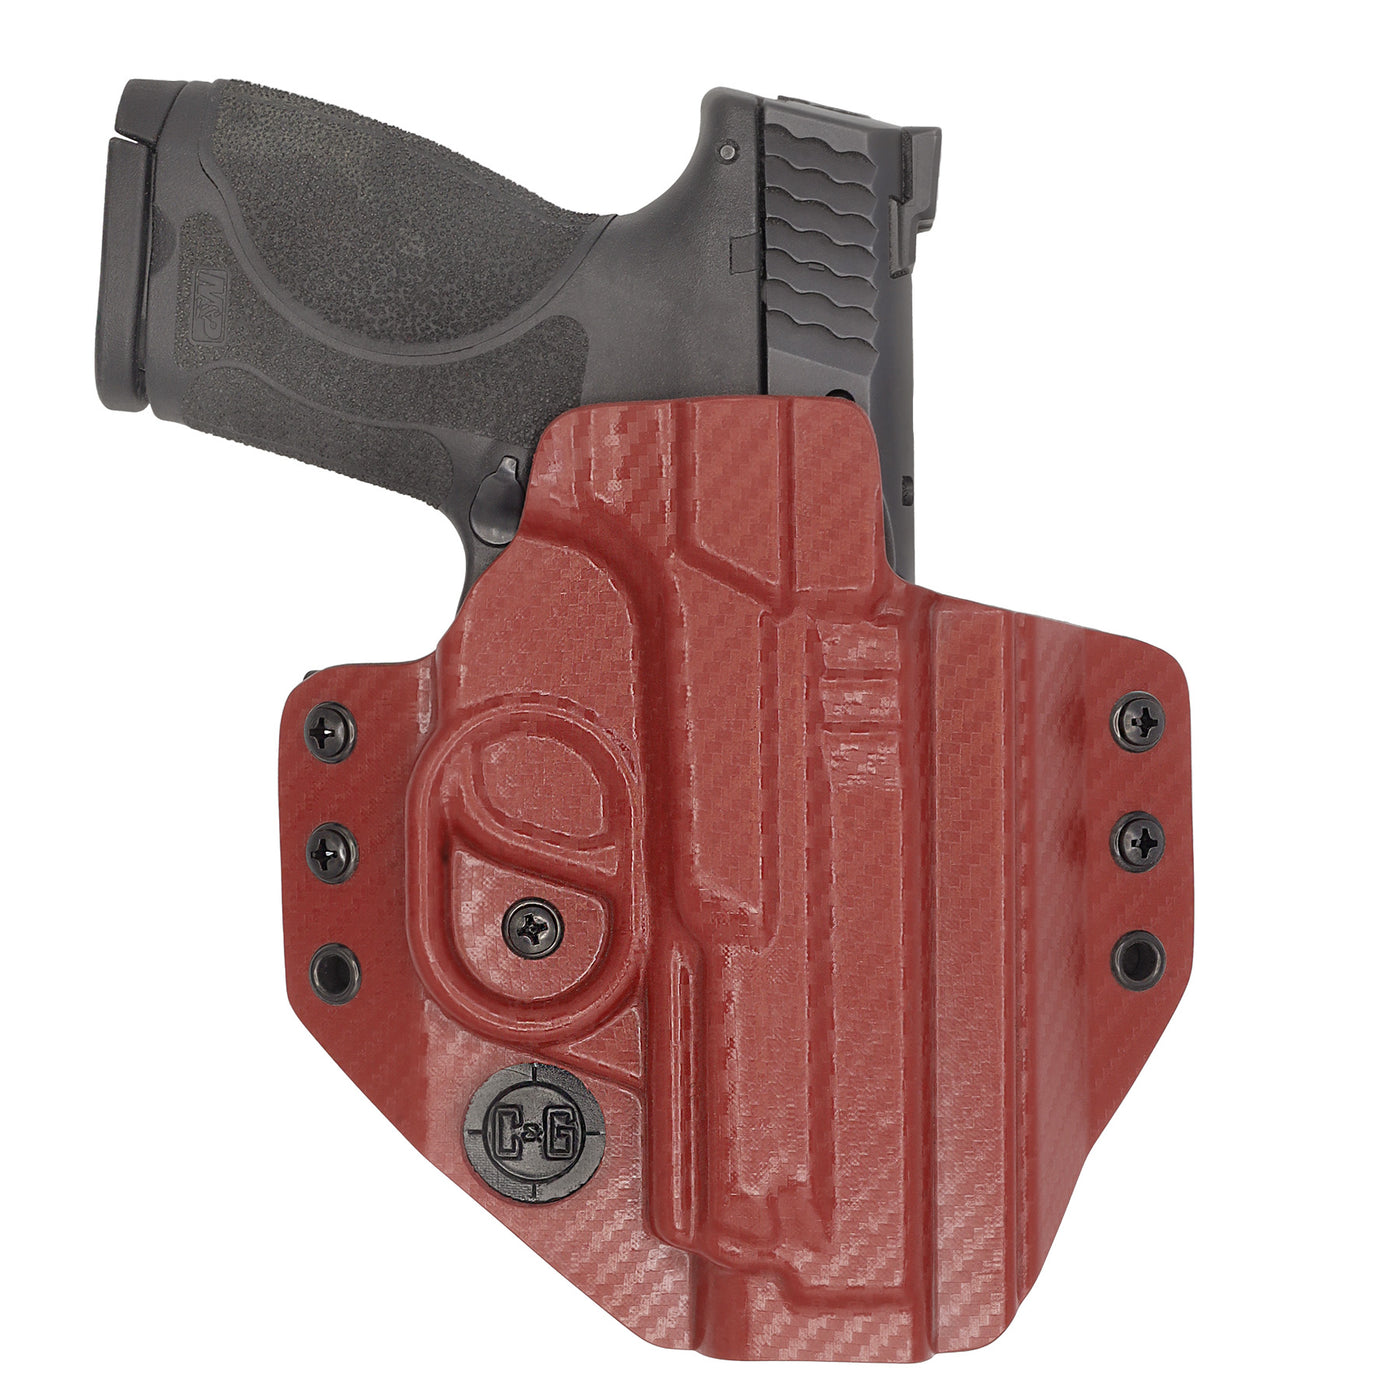 C&G Holsters custom Signature Series outside the waistband in holstered position